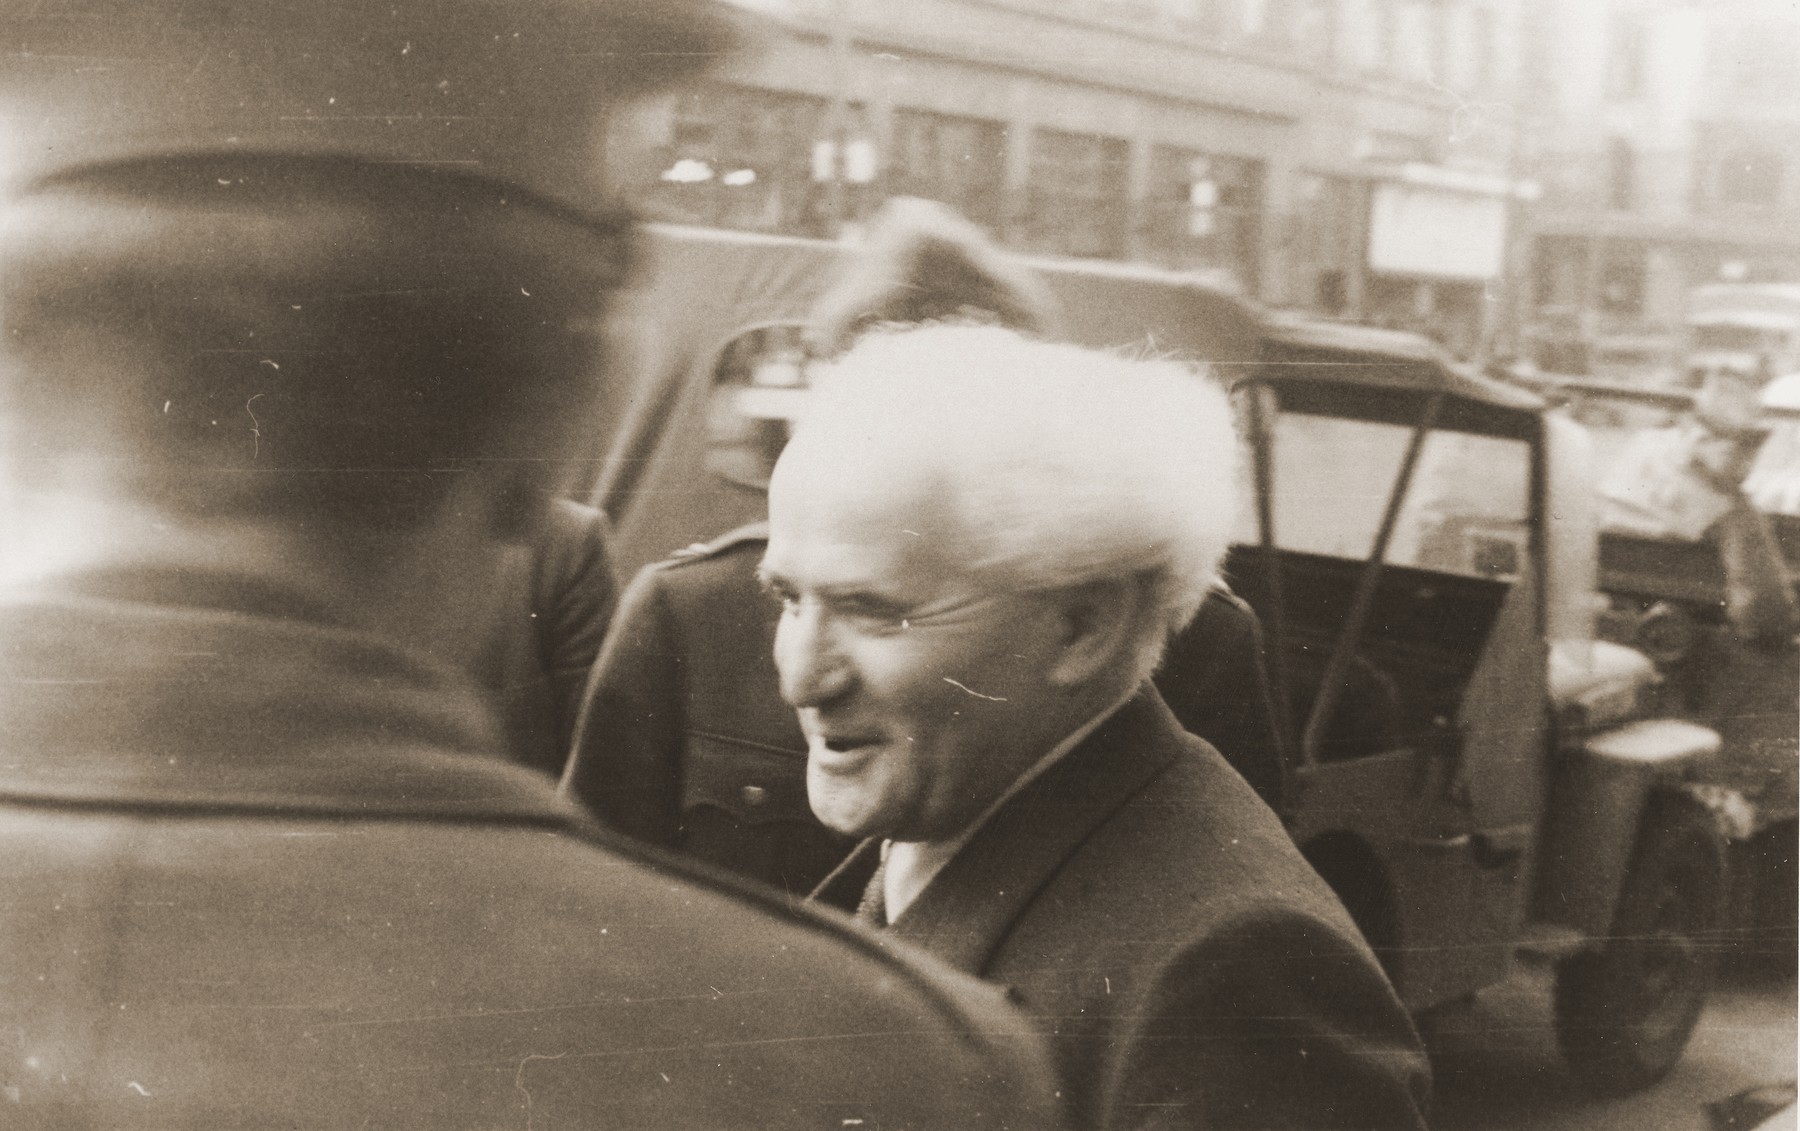 David Ben-Gurion is greeted by Chaim Hoffmann (with his back to the camera) and others during an official visit to the American zone of Germany.  

Ben-Gurion is on his way to the Babenhausen bei Aschaffenburg displaced persons camp near Frankfurt.